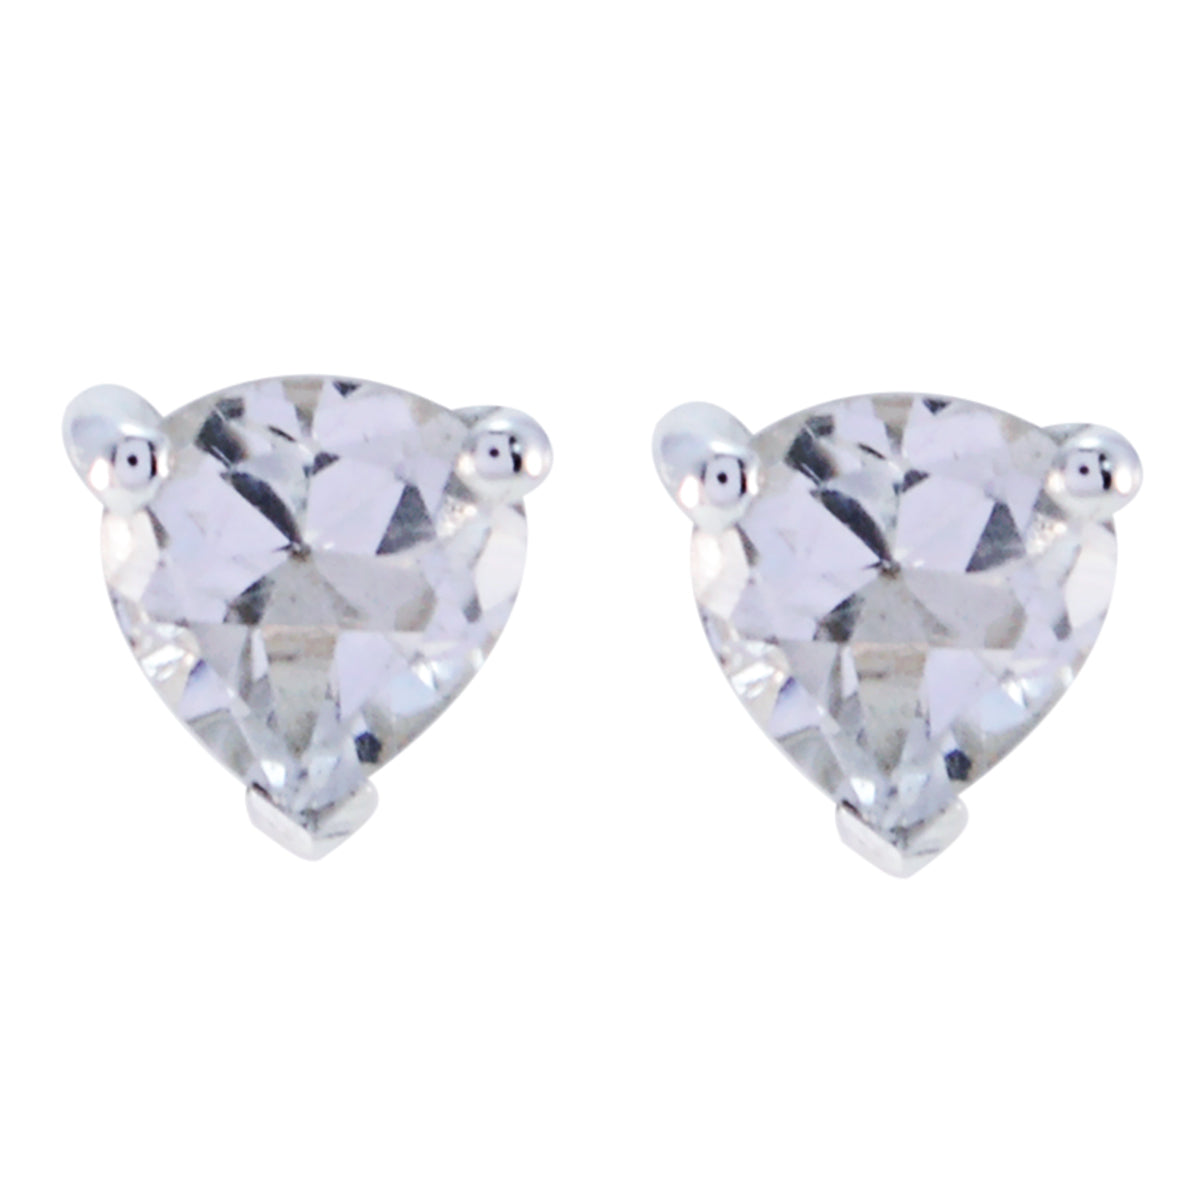 Riyo Real Gemstones trillion Faceted White White CZ Silver Earrings gift for friendship day